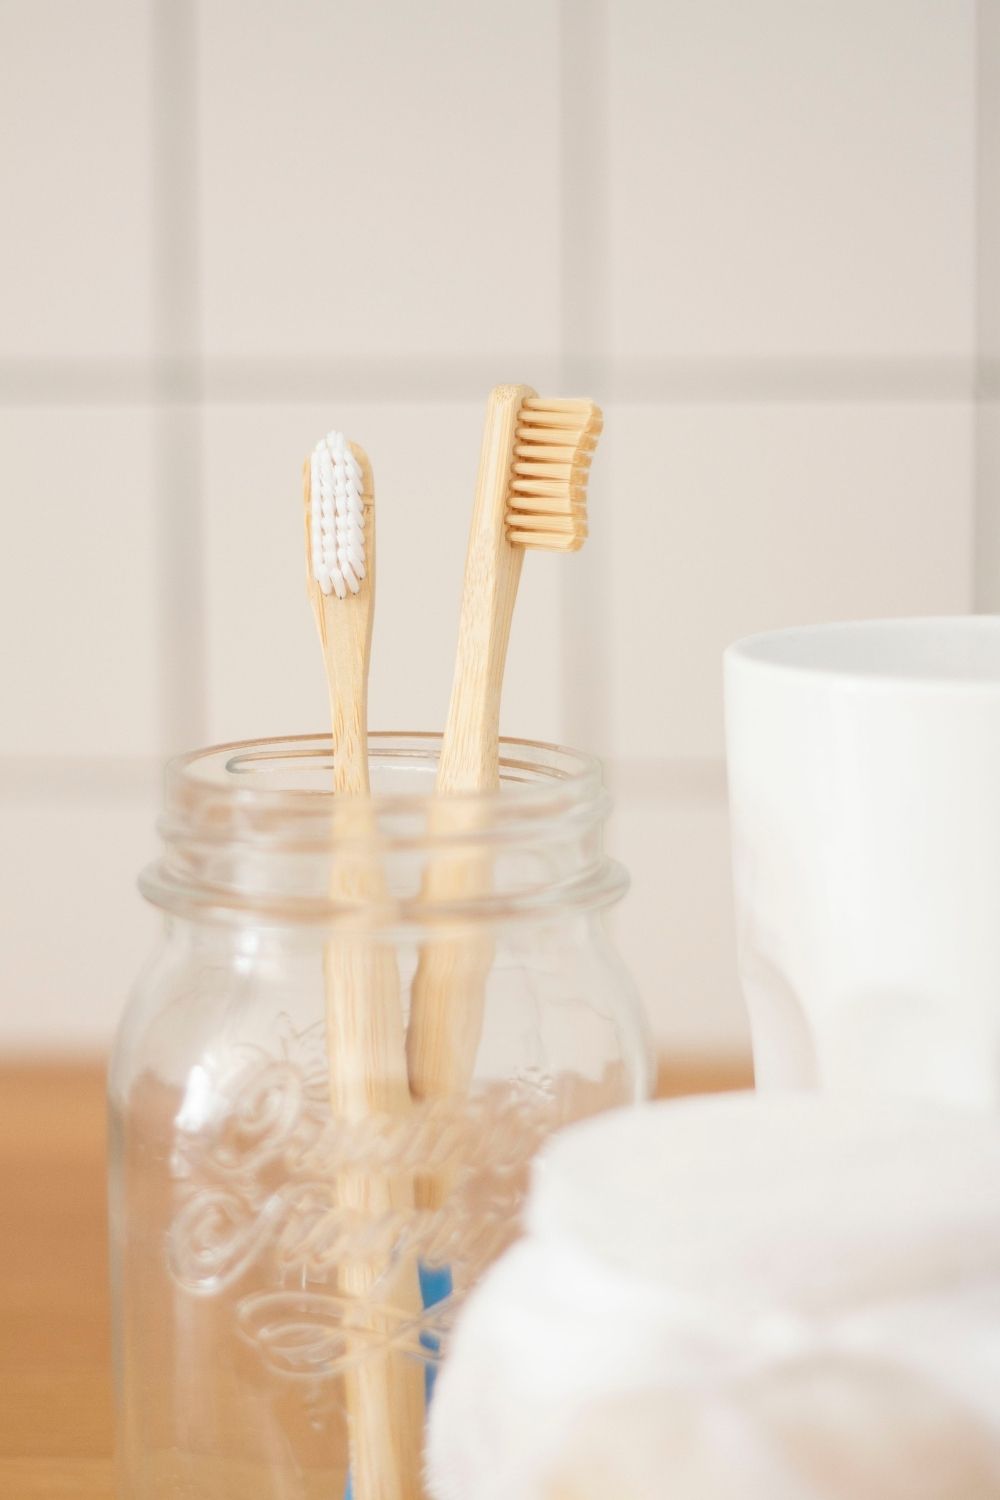 Two bamboo toothbrushes in mason jar